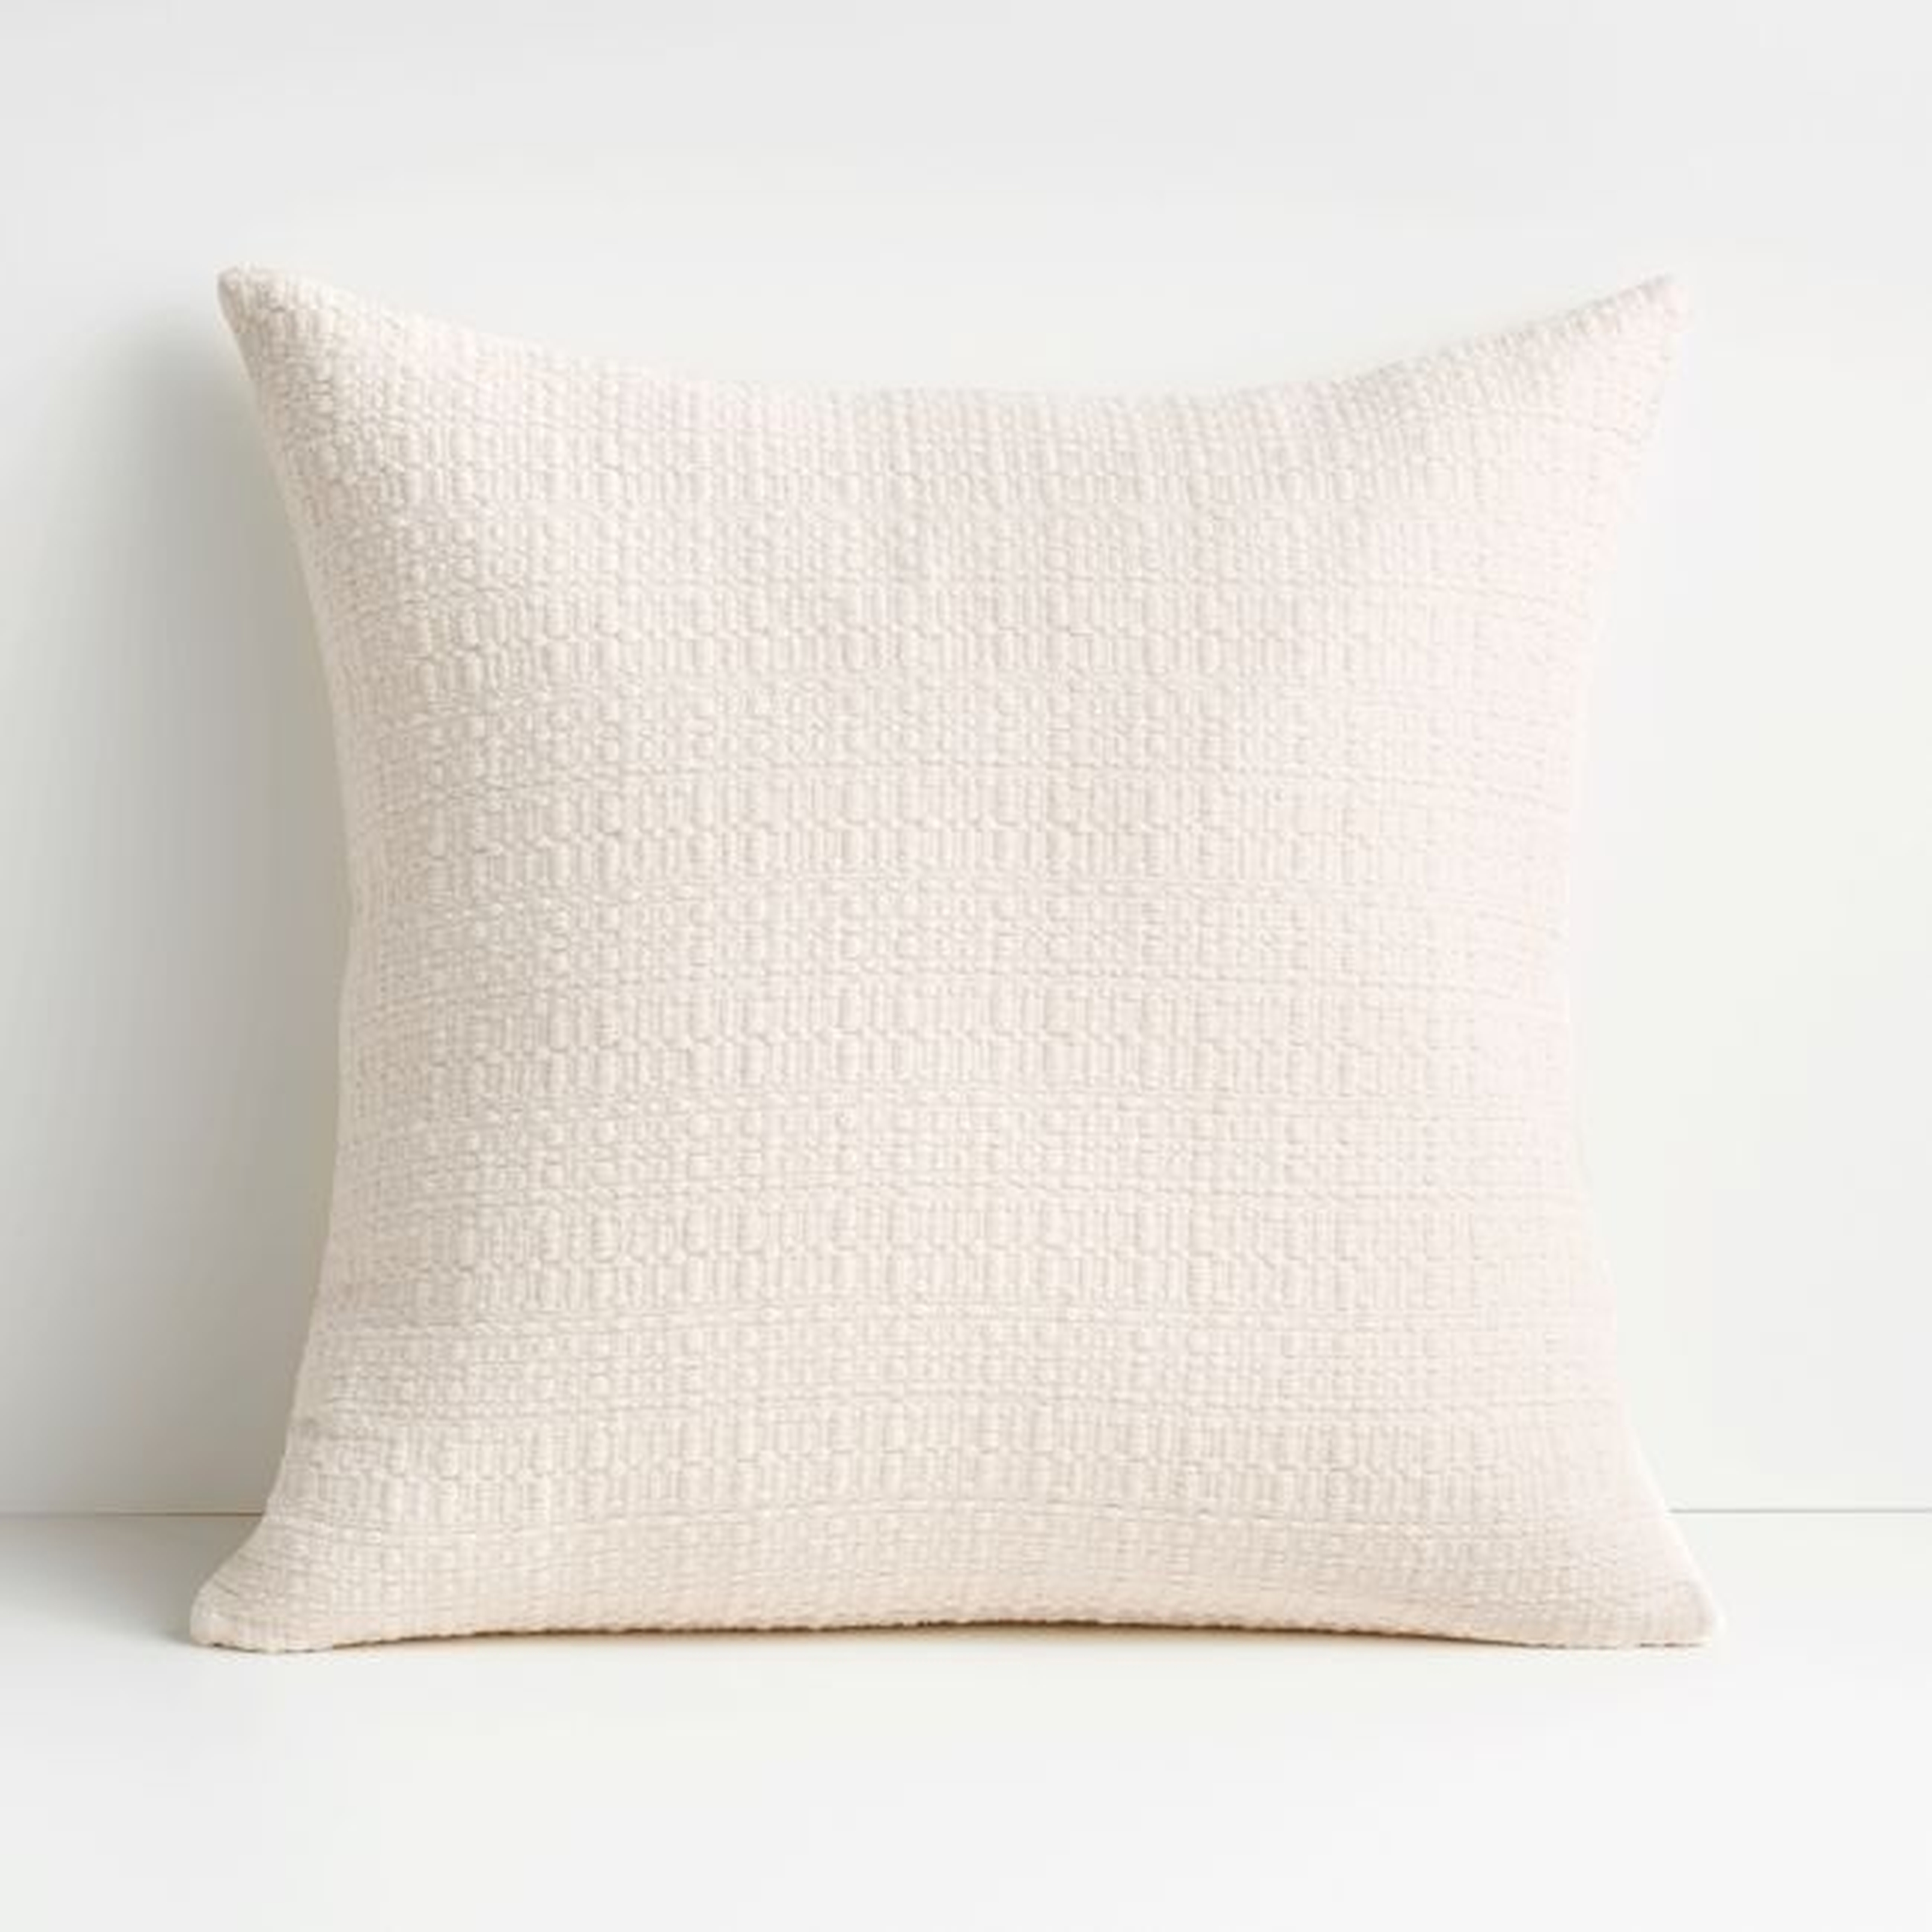 Bari 20"x20" White Swan Knitted Throw Pillow Cover - Crate and Barrel